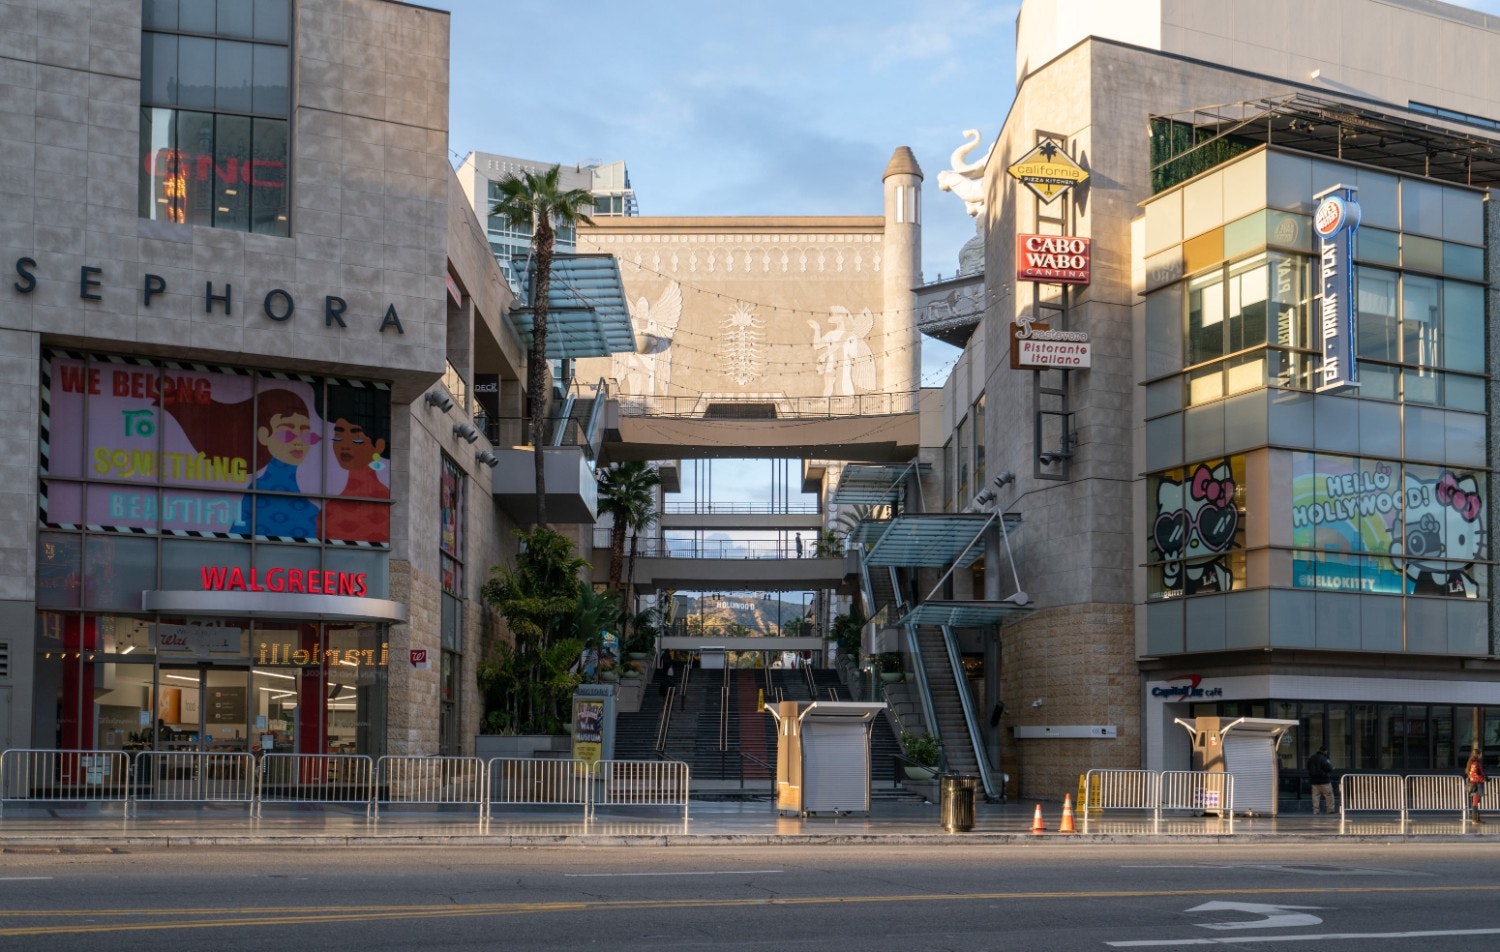 Hollywood & Highland shopping mall on Hollywood Blvd after Los Angeles ordered the closure of all non-essential services and entertainment venues